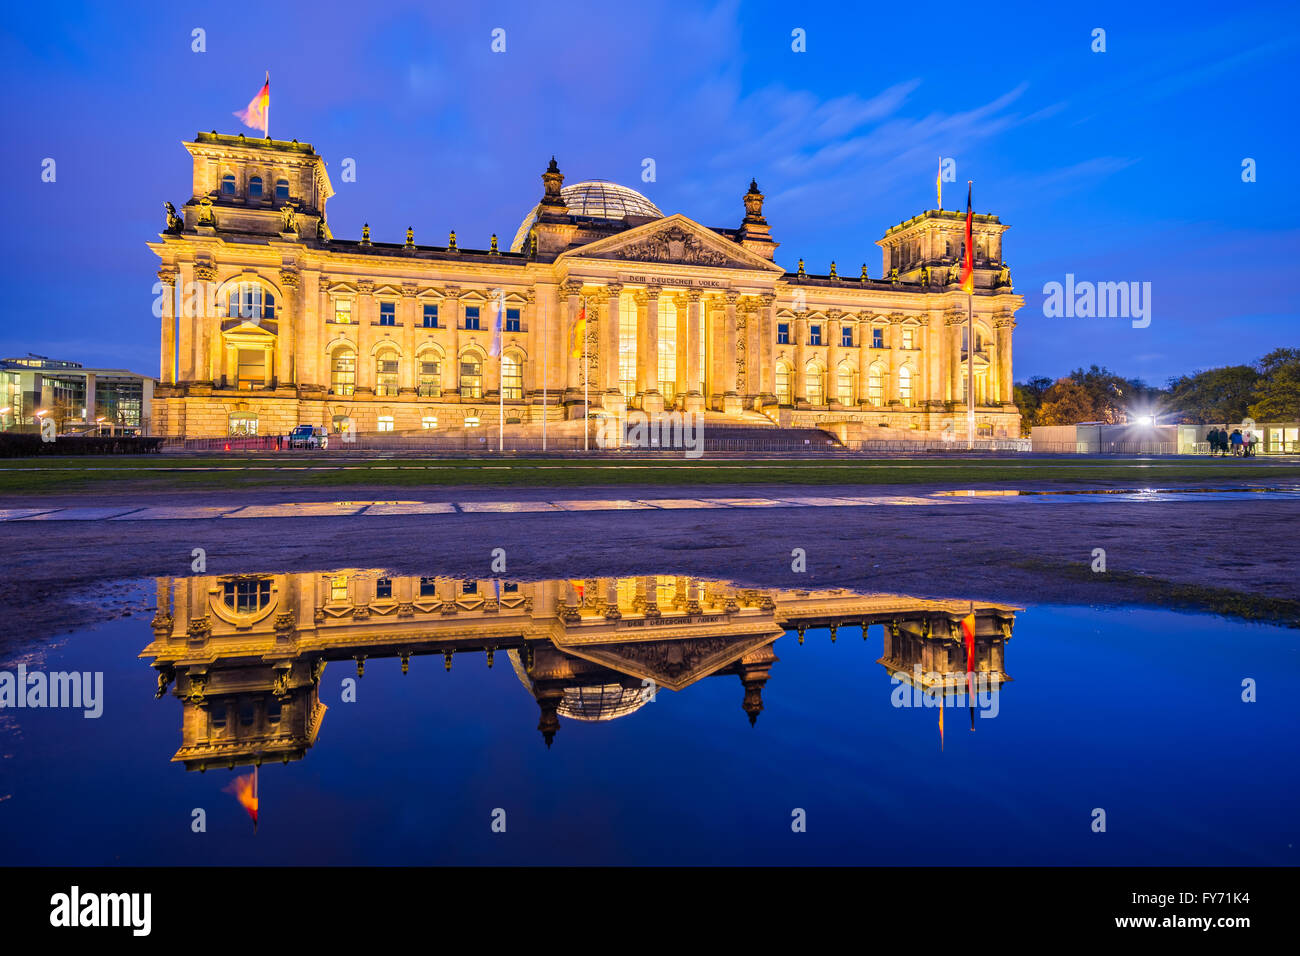 The Reichstag building at night in Berlin, Germany. Stock Photo